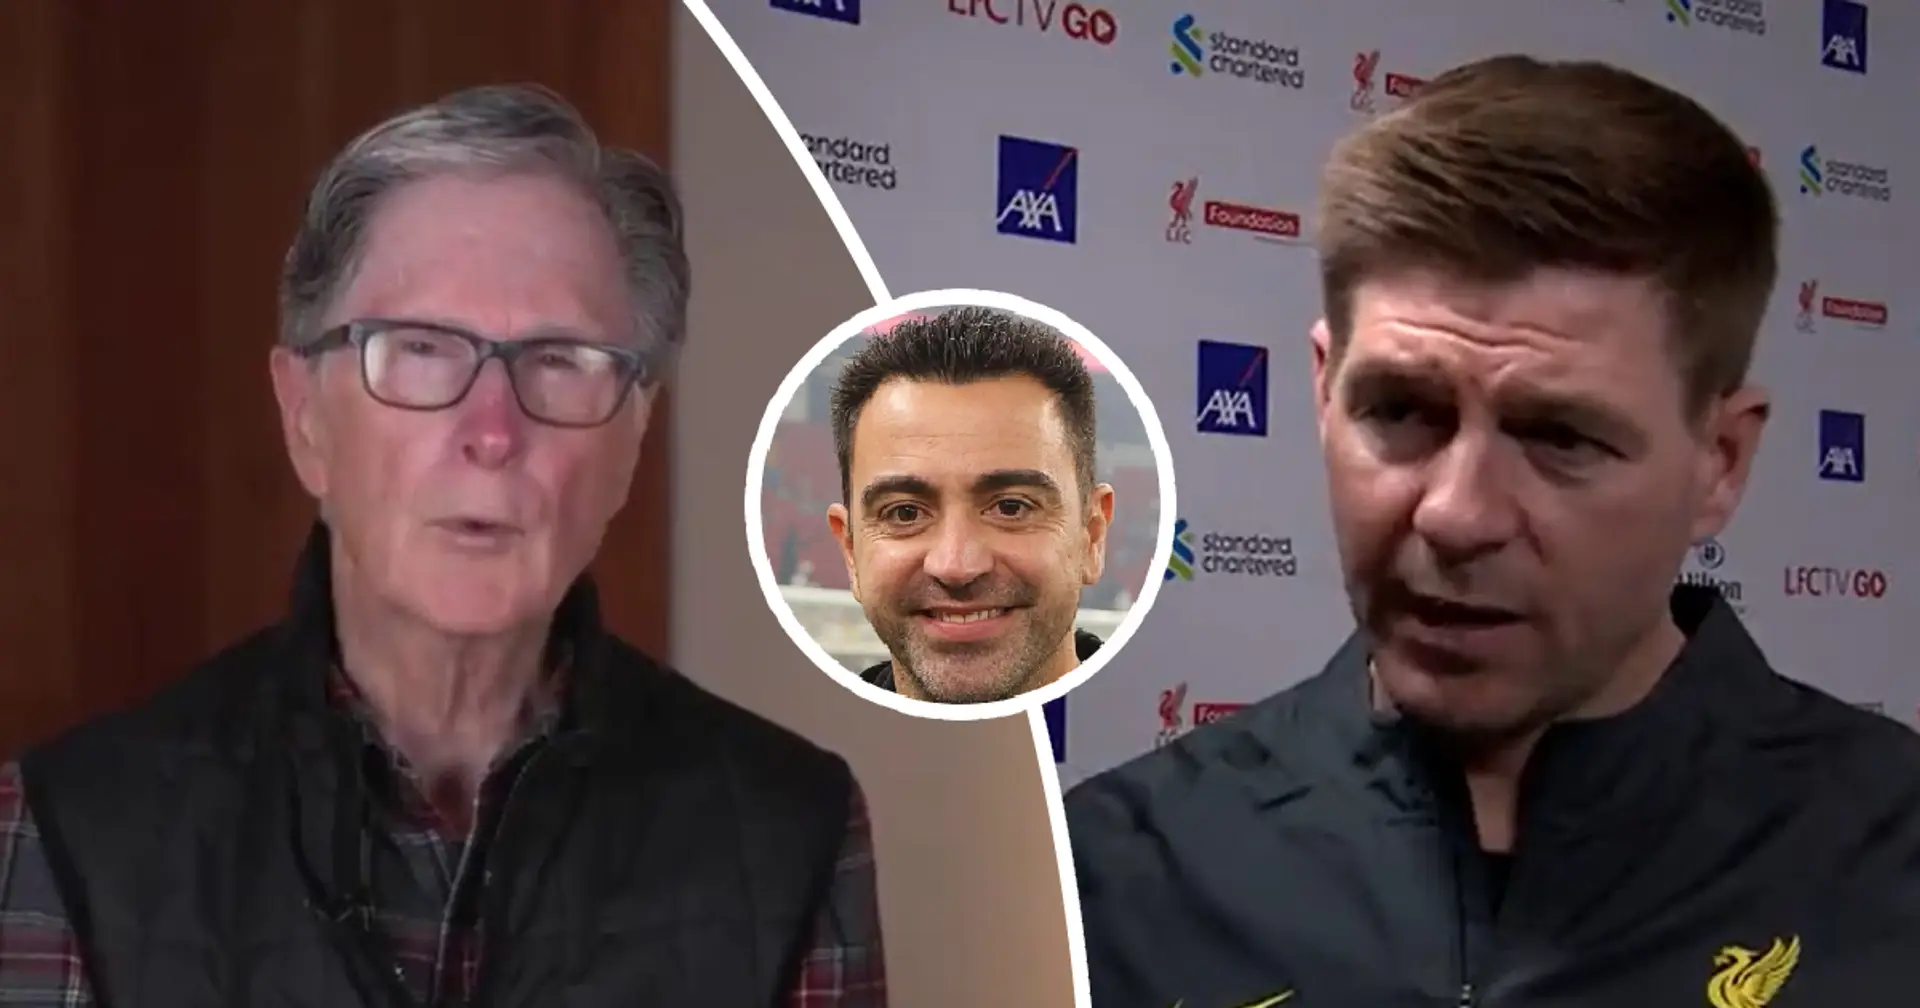 'FSG take note': fans confident Gerrard dropped Liverpool hint with Barcelona 'masterstroke' claim